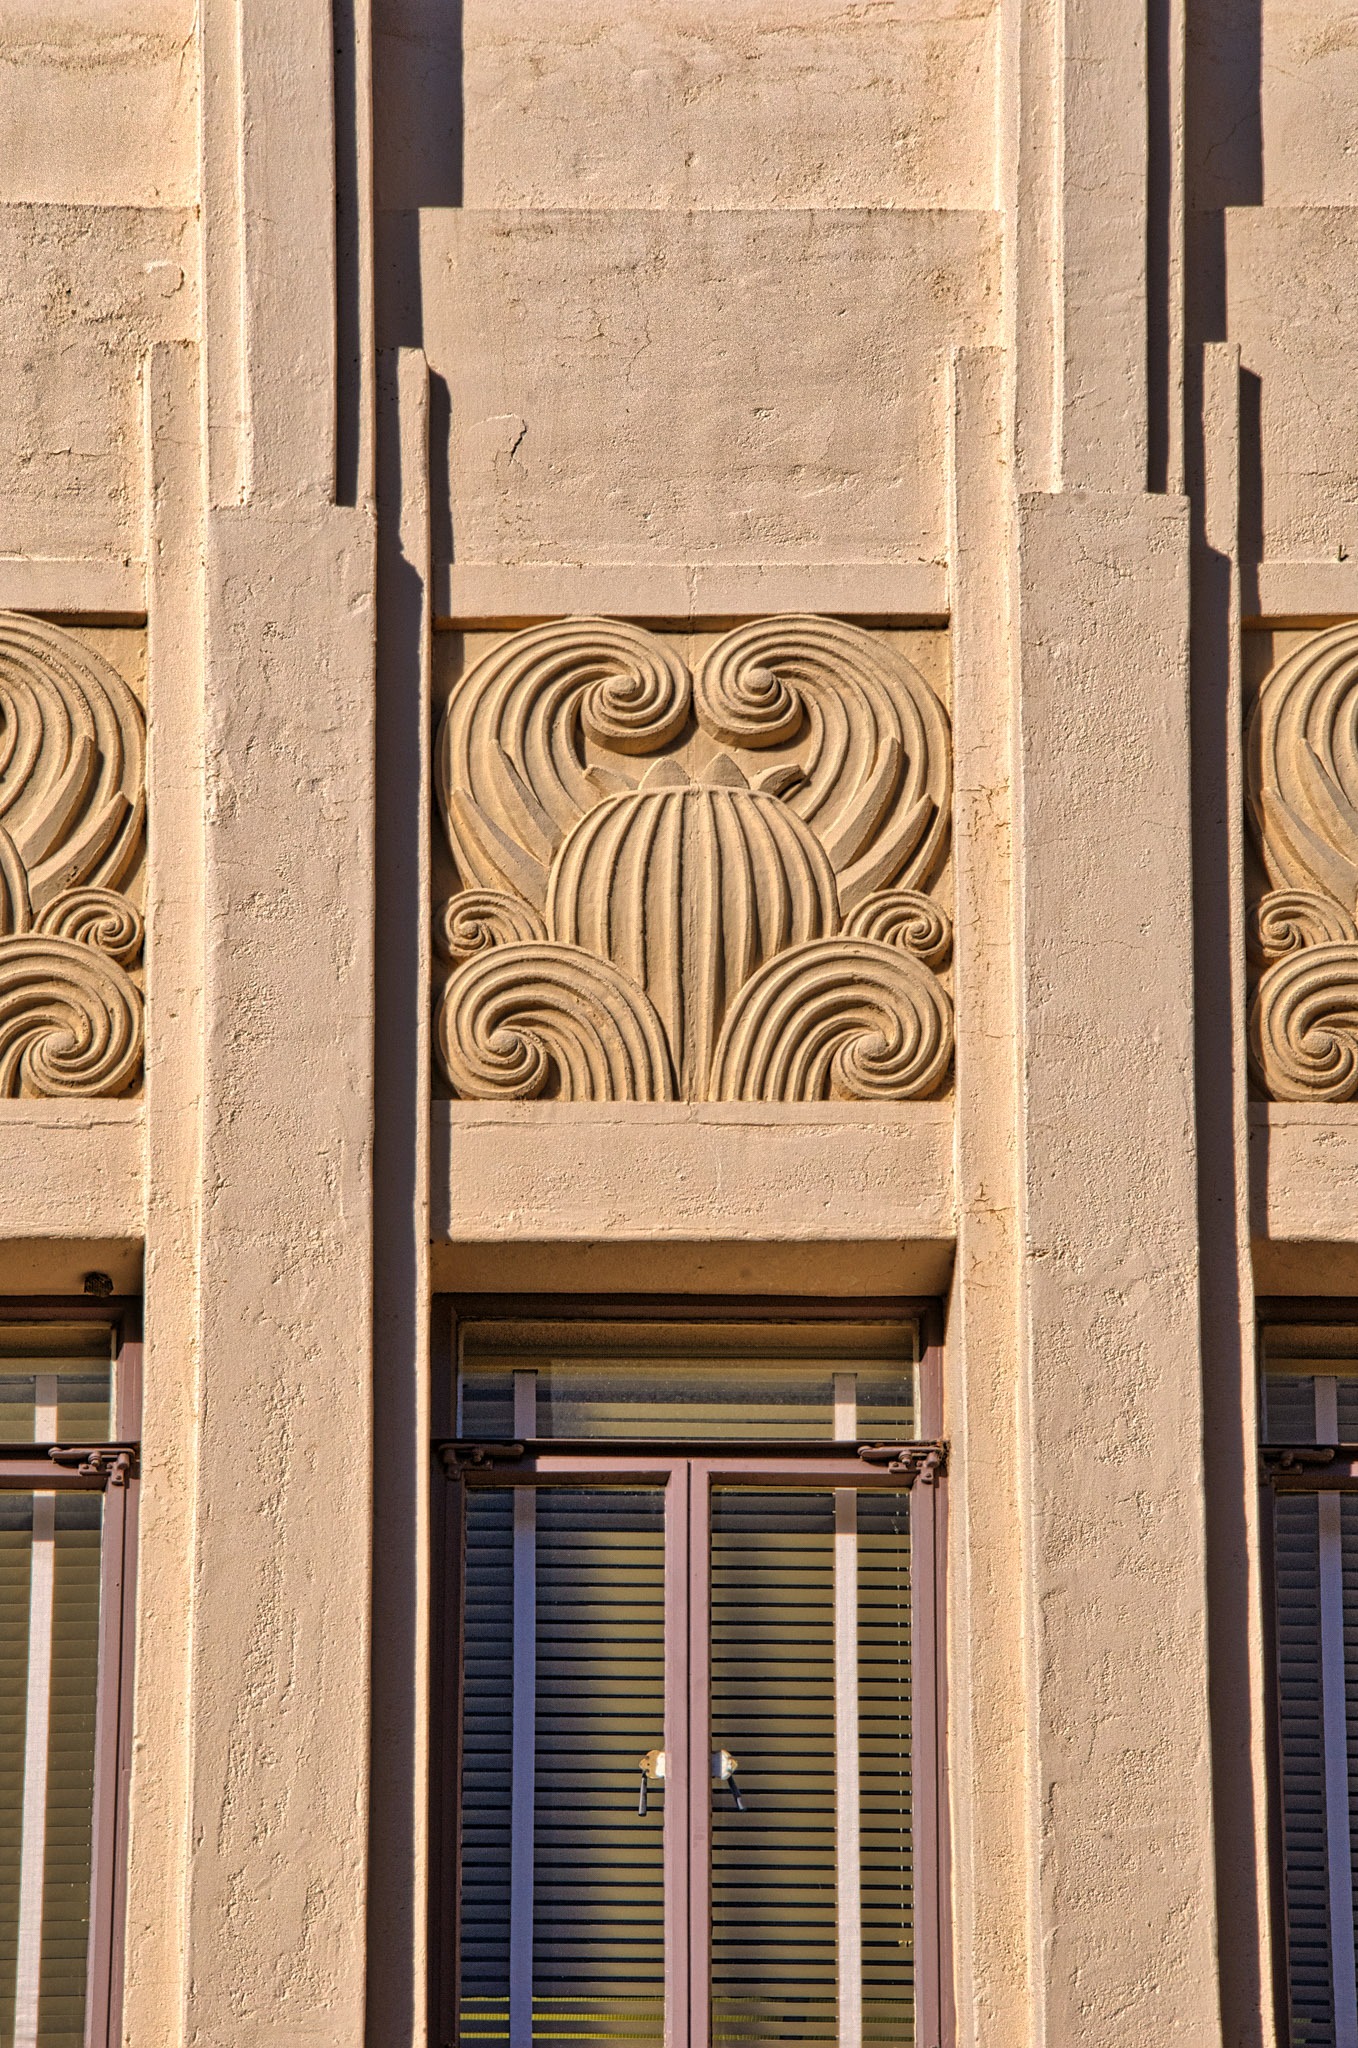 This Art Deco style bas releif on the exterior of the Cochise County Courthouse in Bisbee, Arizona, pays homage to desert plant-life.